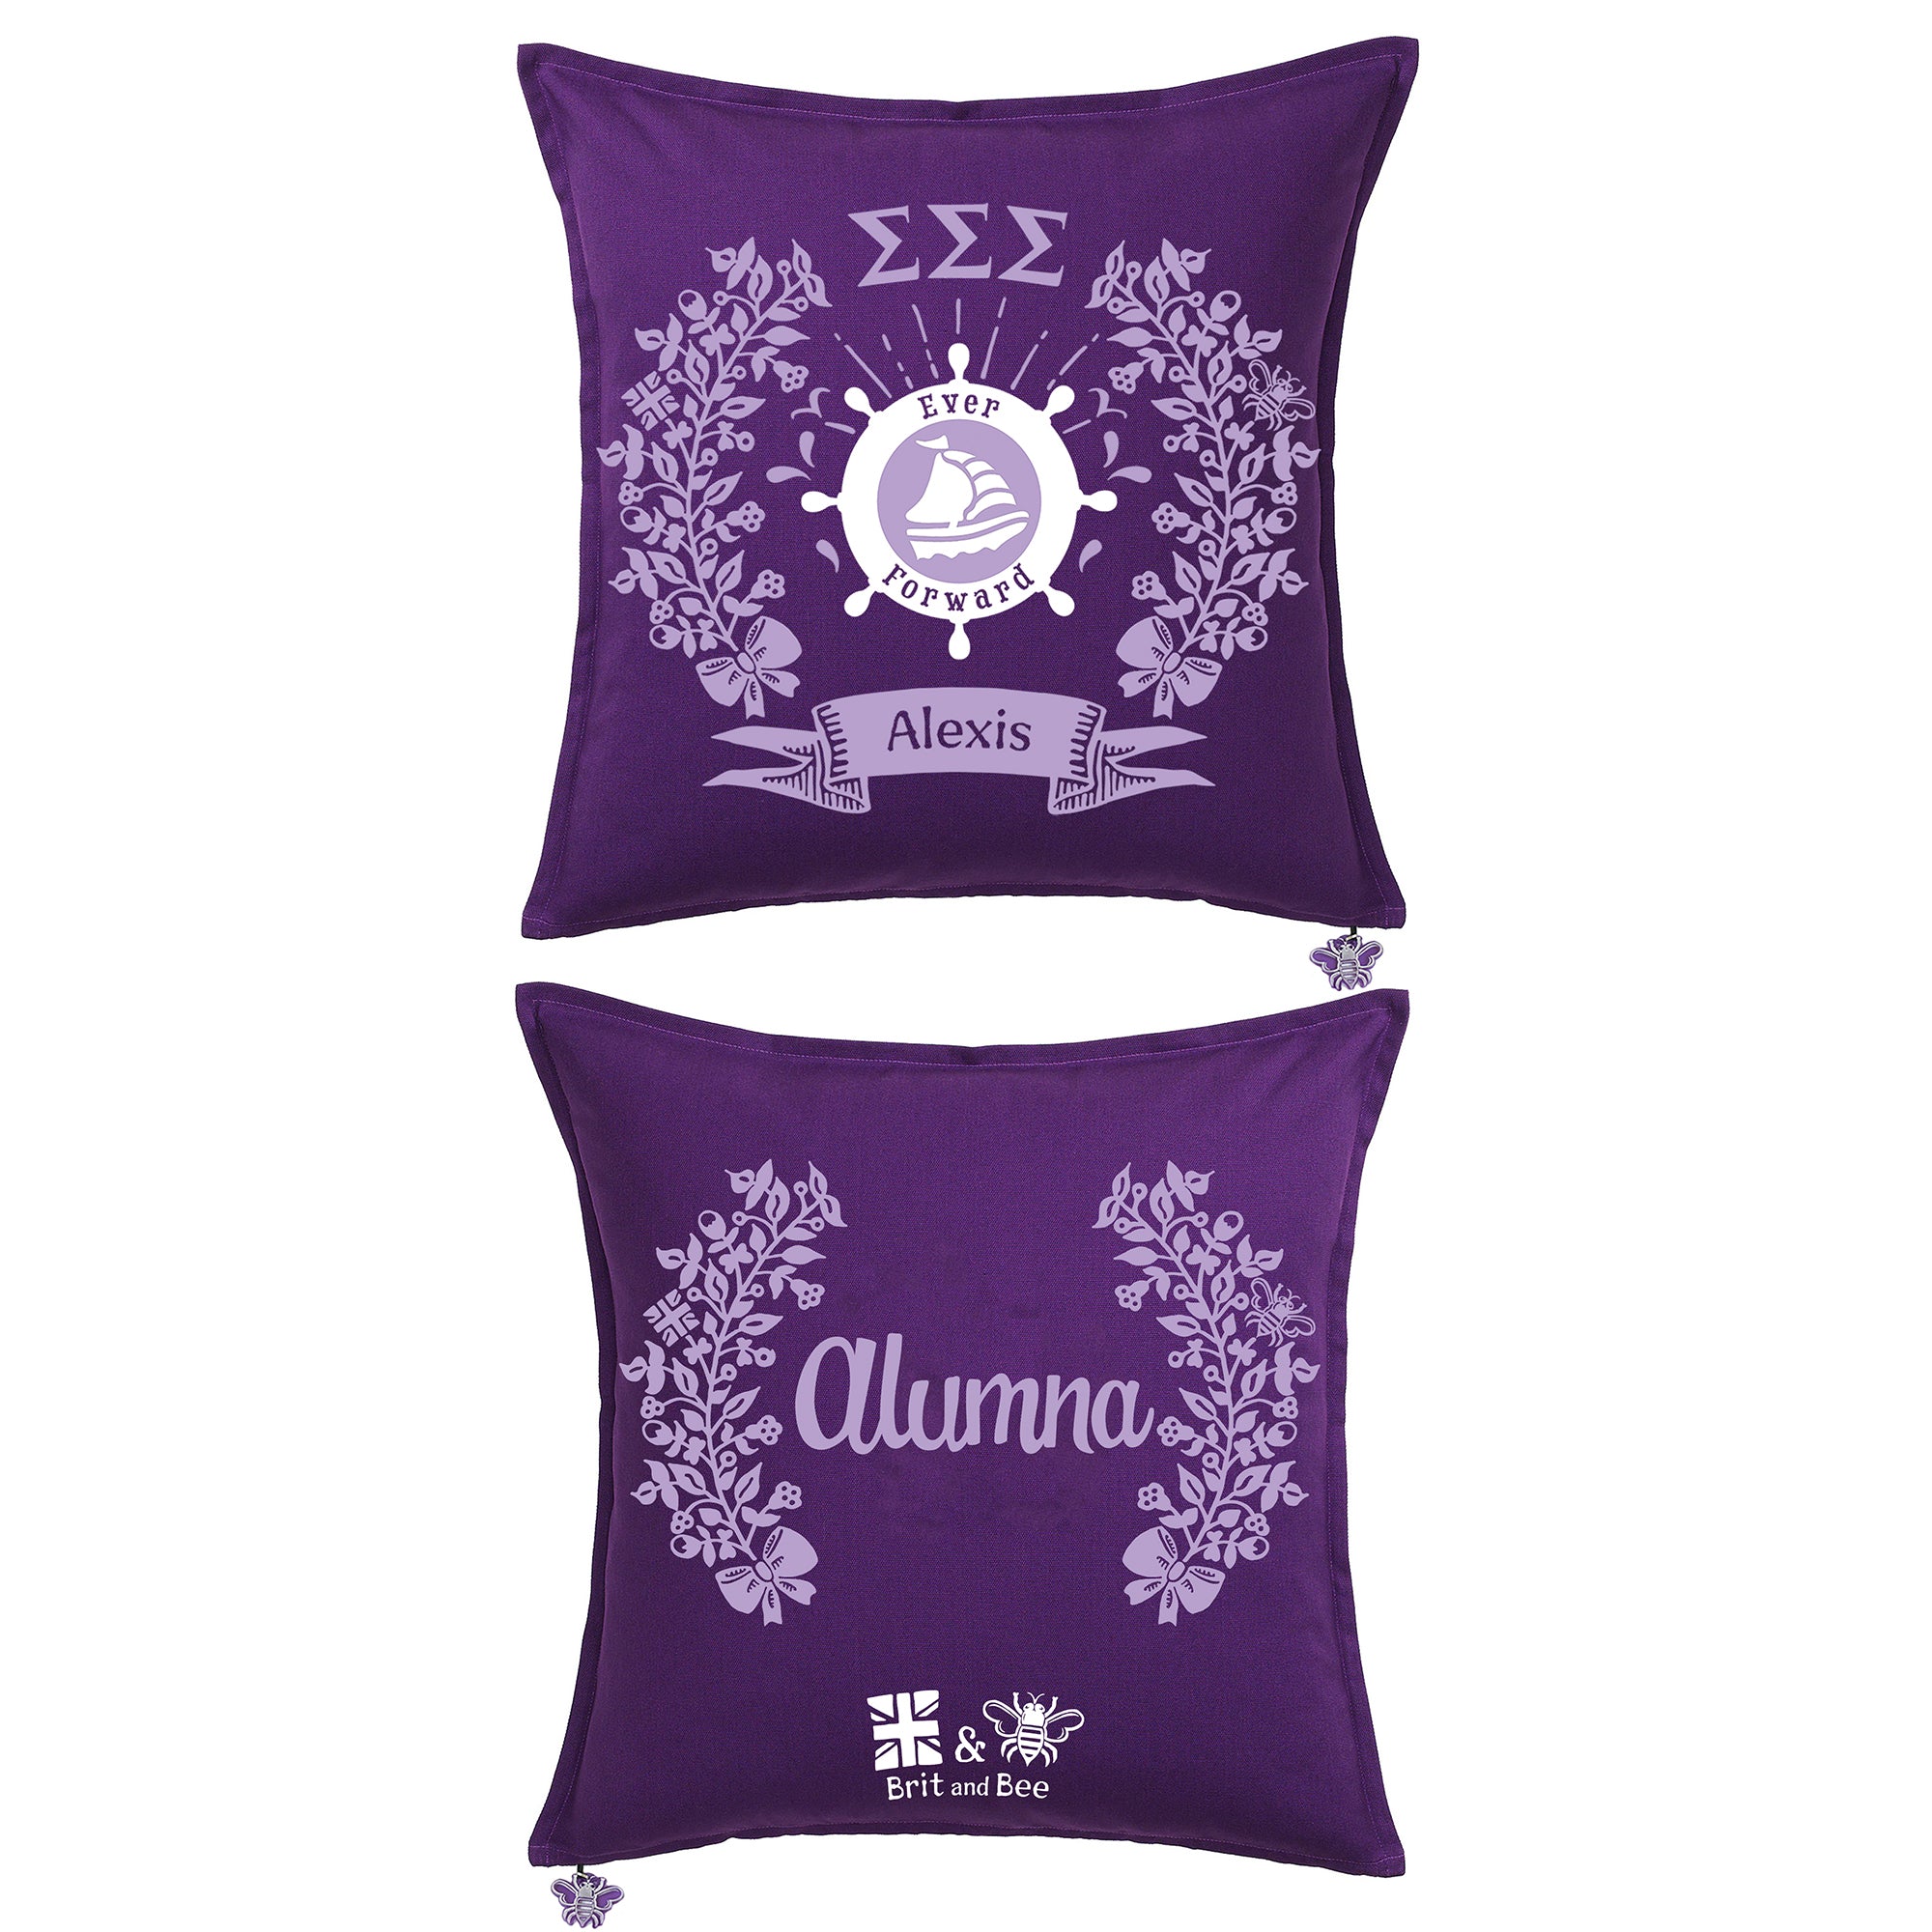 Sigma Sigma Sigma Pillow | Brit and Bee